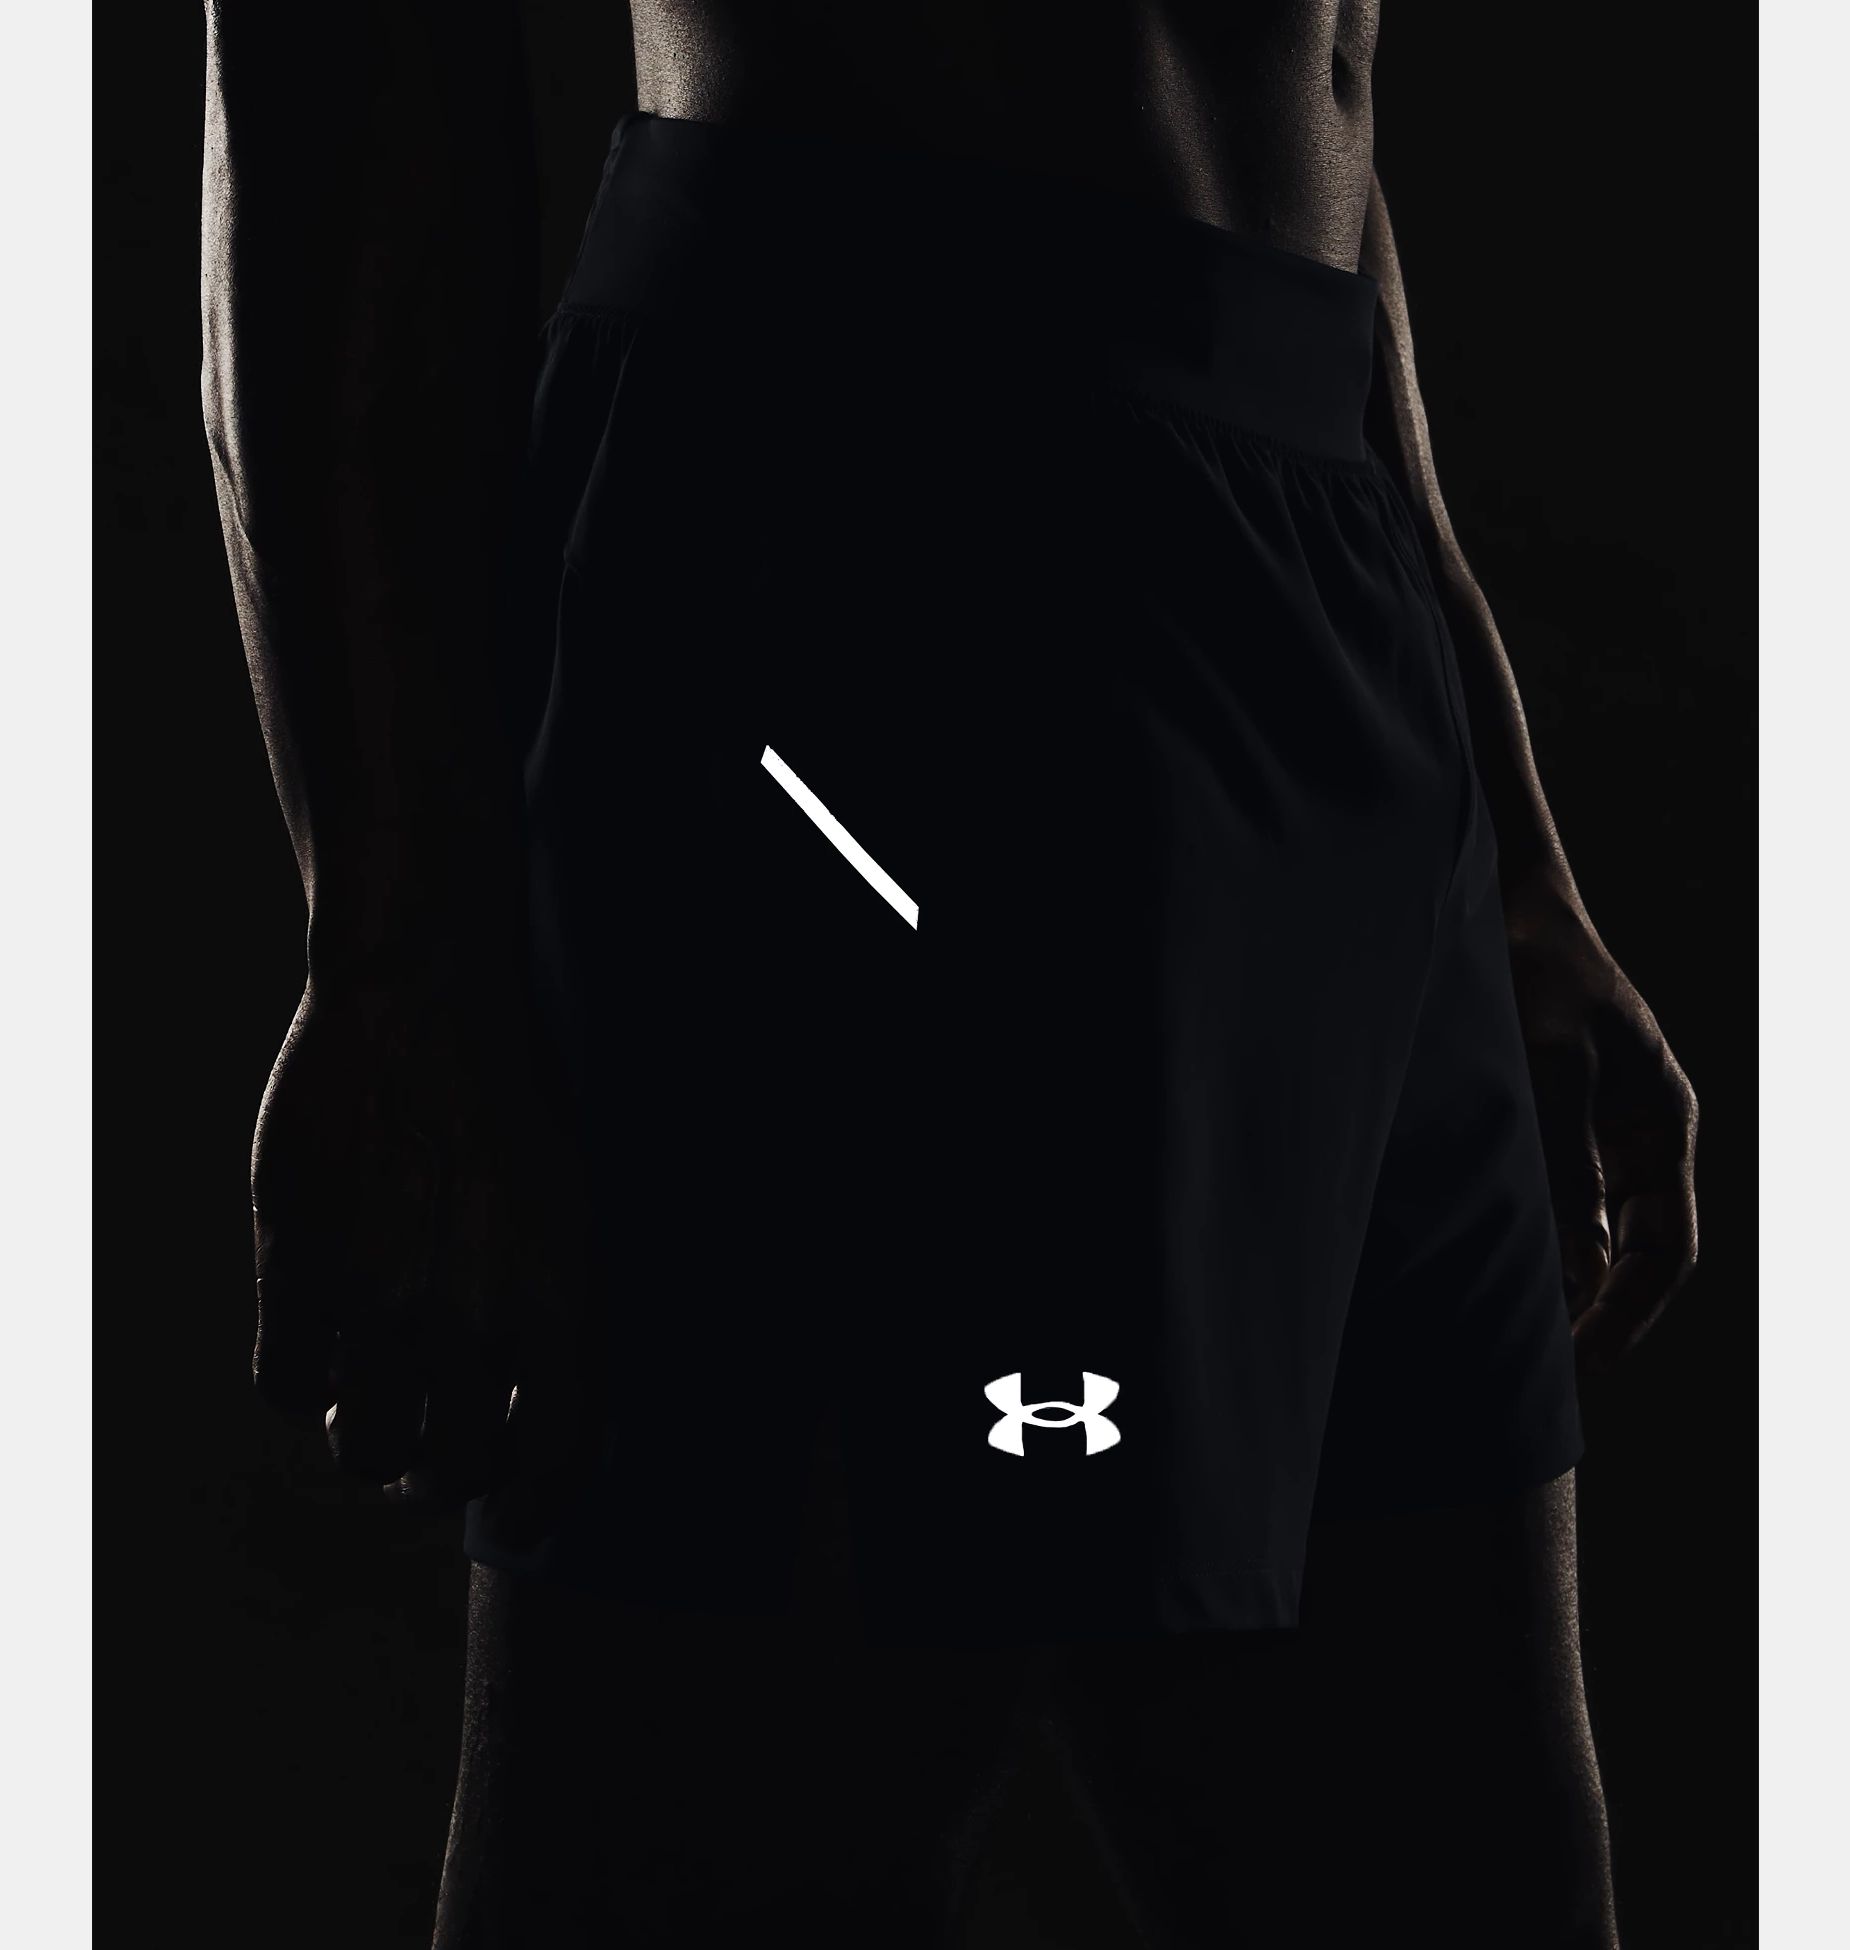 Shorts -  under armour Launch Elite 5 inch Shorts